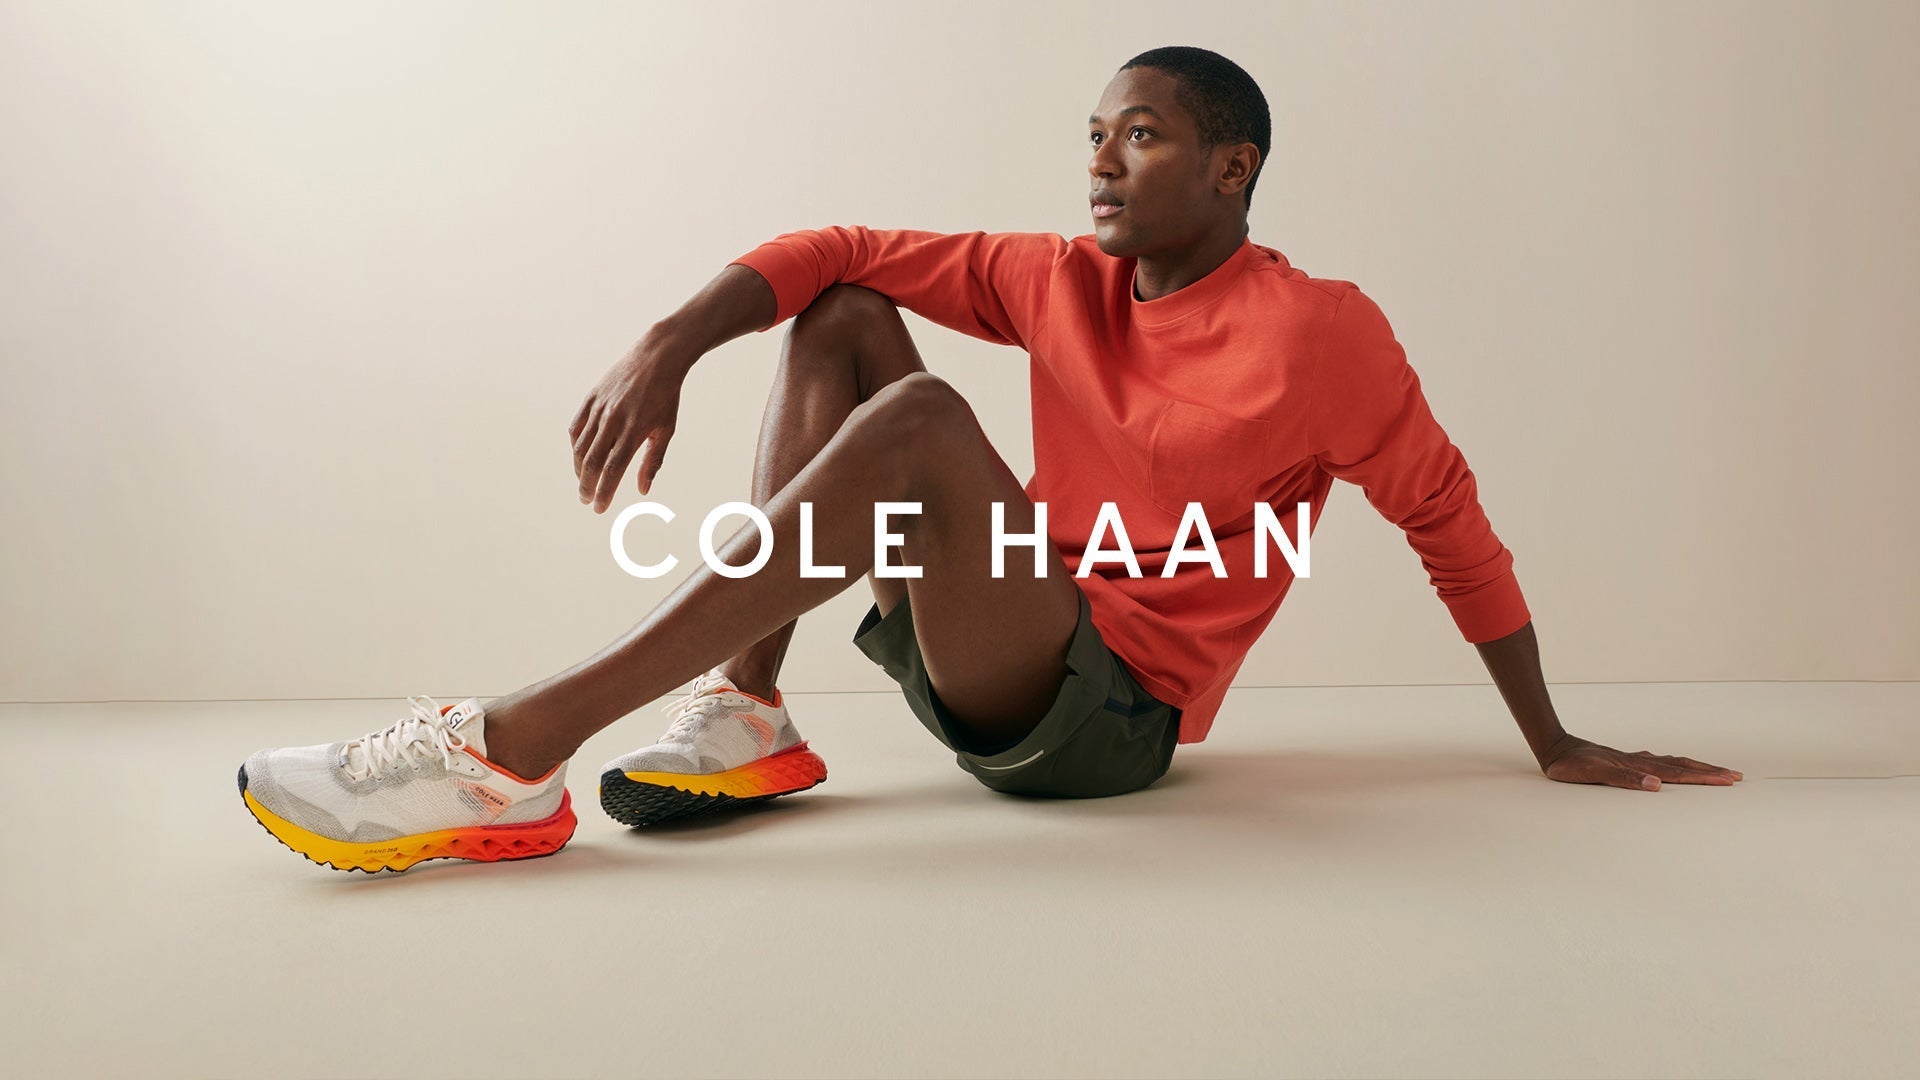 Cole Haan - DICONS